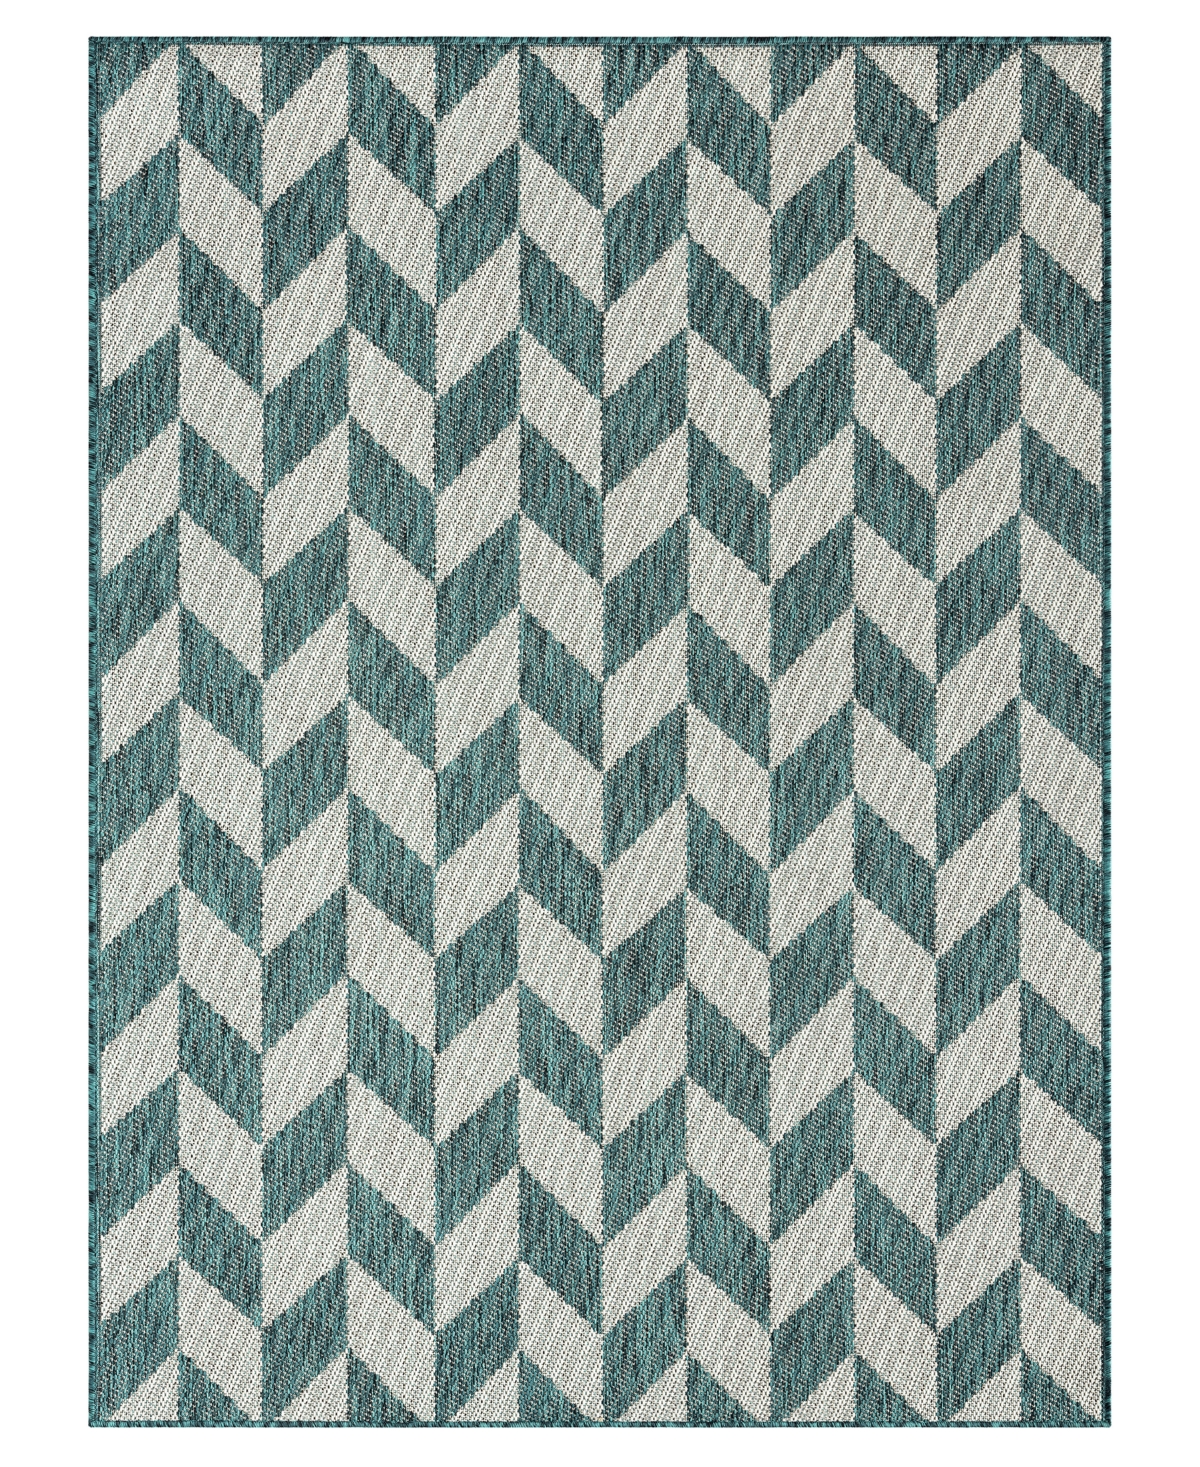 Nicole Miller Patio Country Calla 6'6" X 9'2" Area Rug In Teal